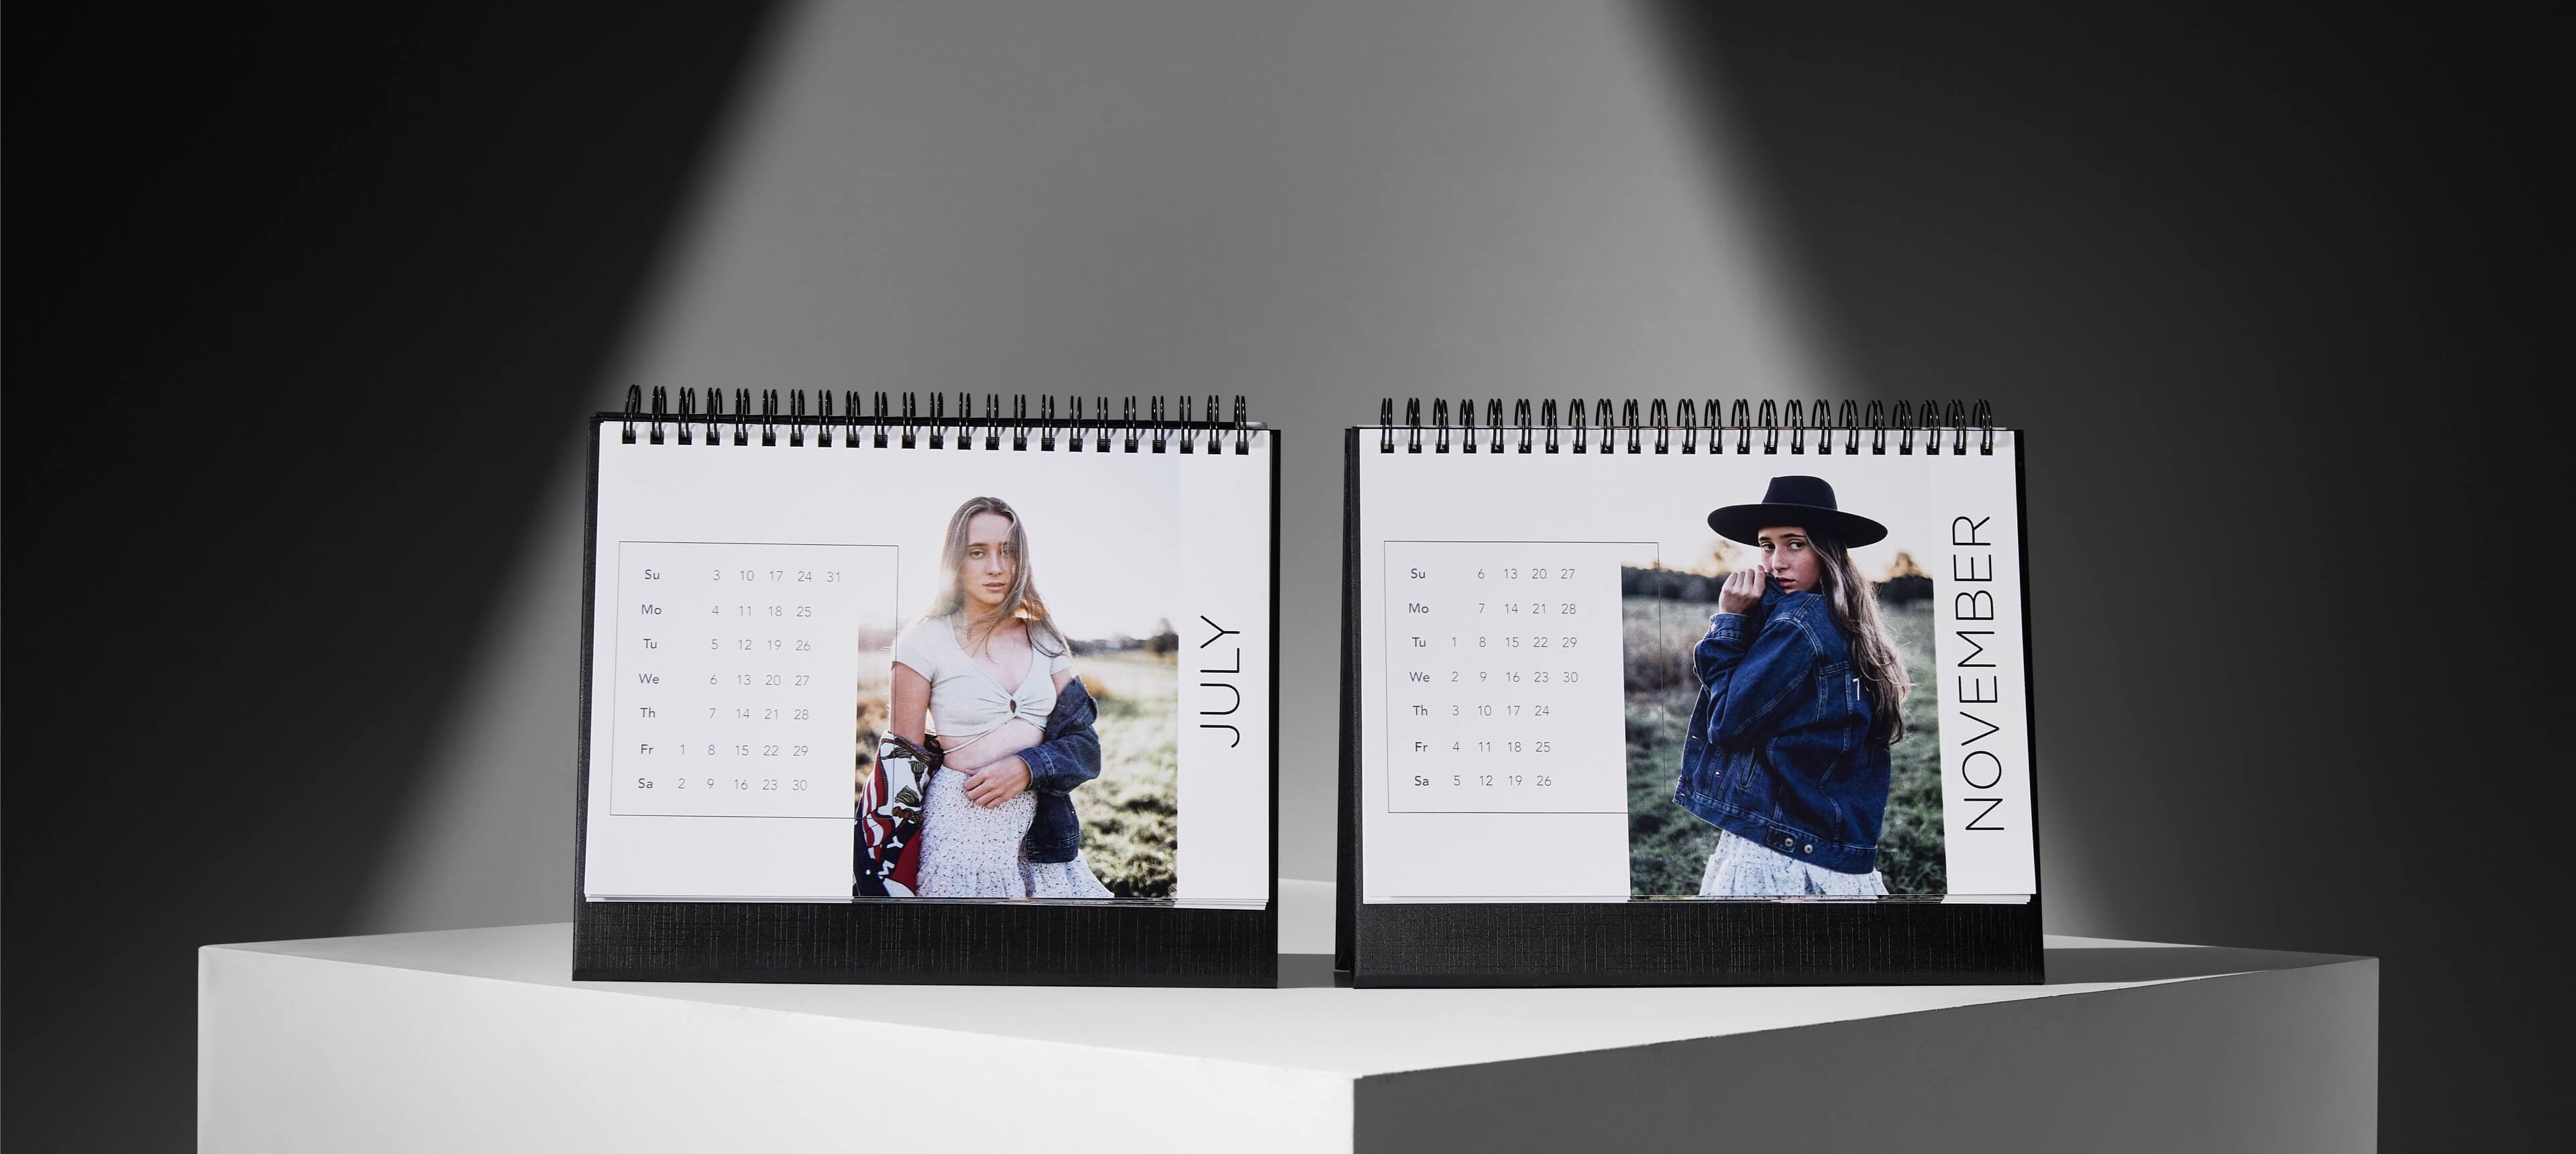 two desk calendars on a white table showing a woman in denim jacket